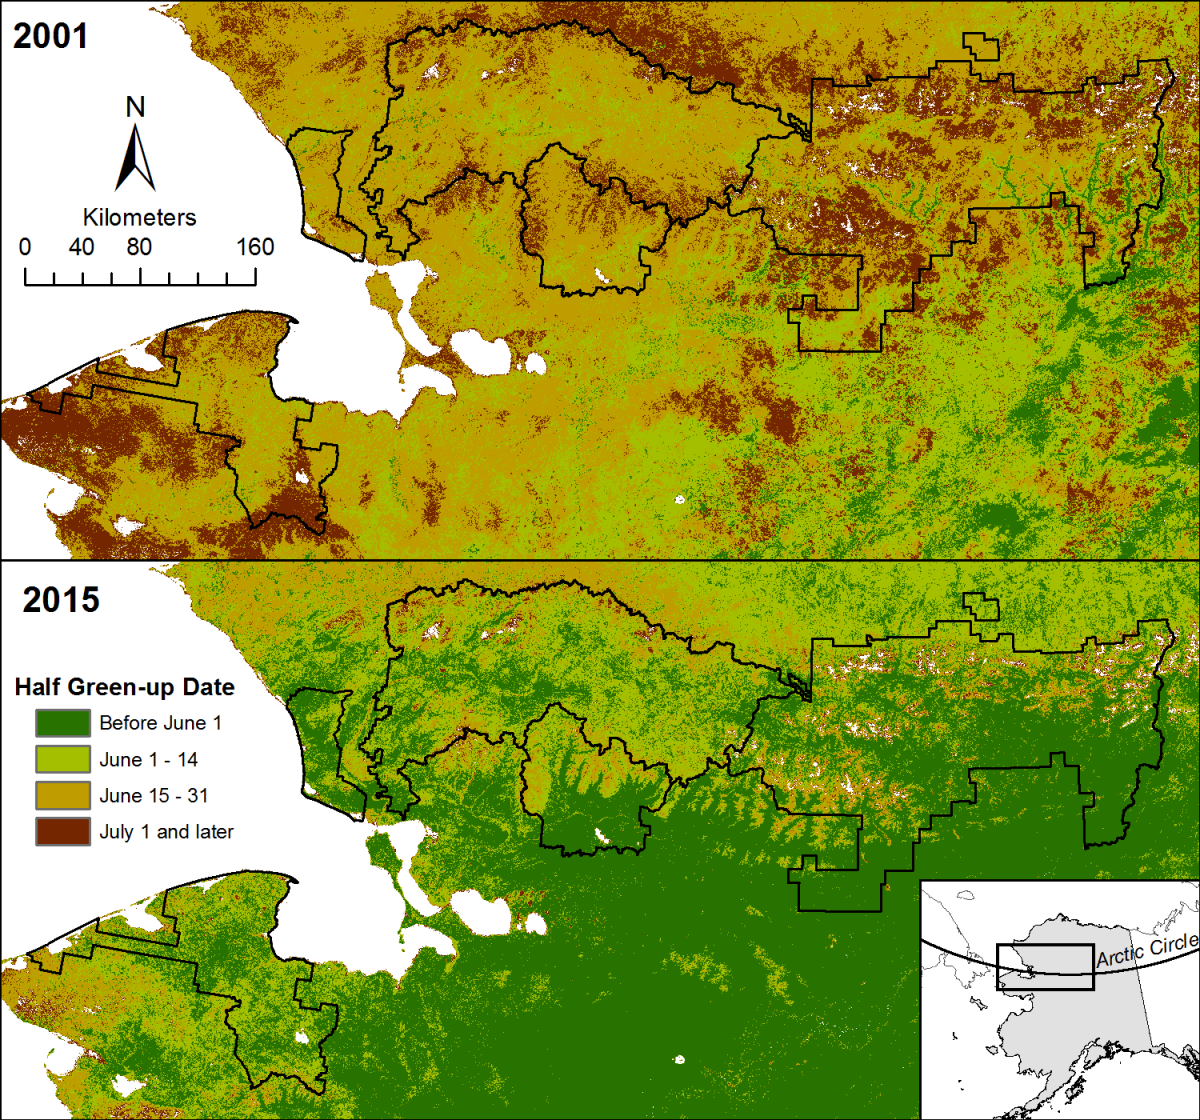 Date of the midpoint of spring vegetation green-up in the national parks of northern Alaska (outlined in black). The upper image is from 2001, a year with late green-up, and the lower image is from 2015, a year with early green-up.